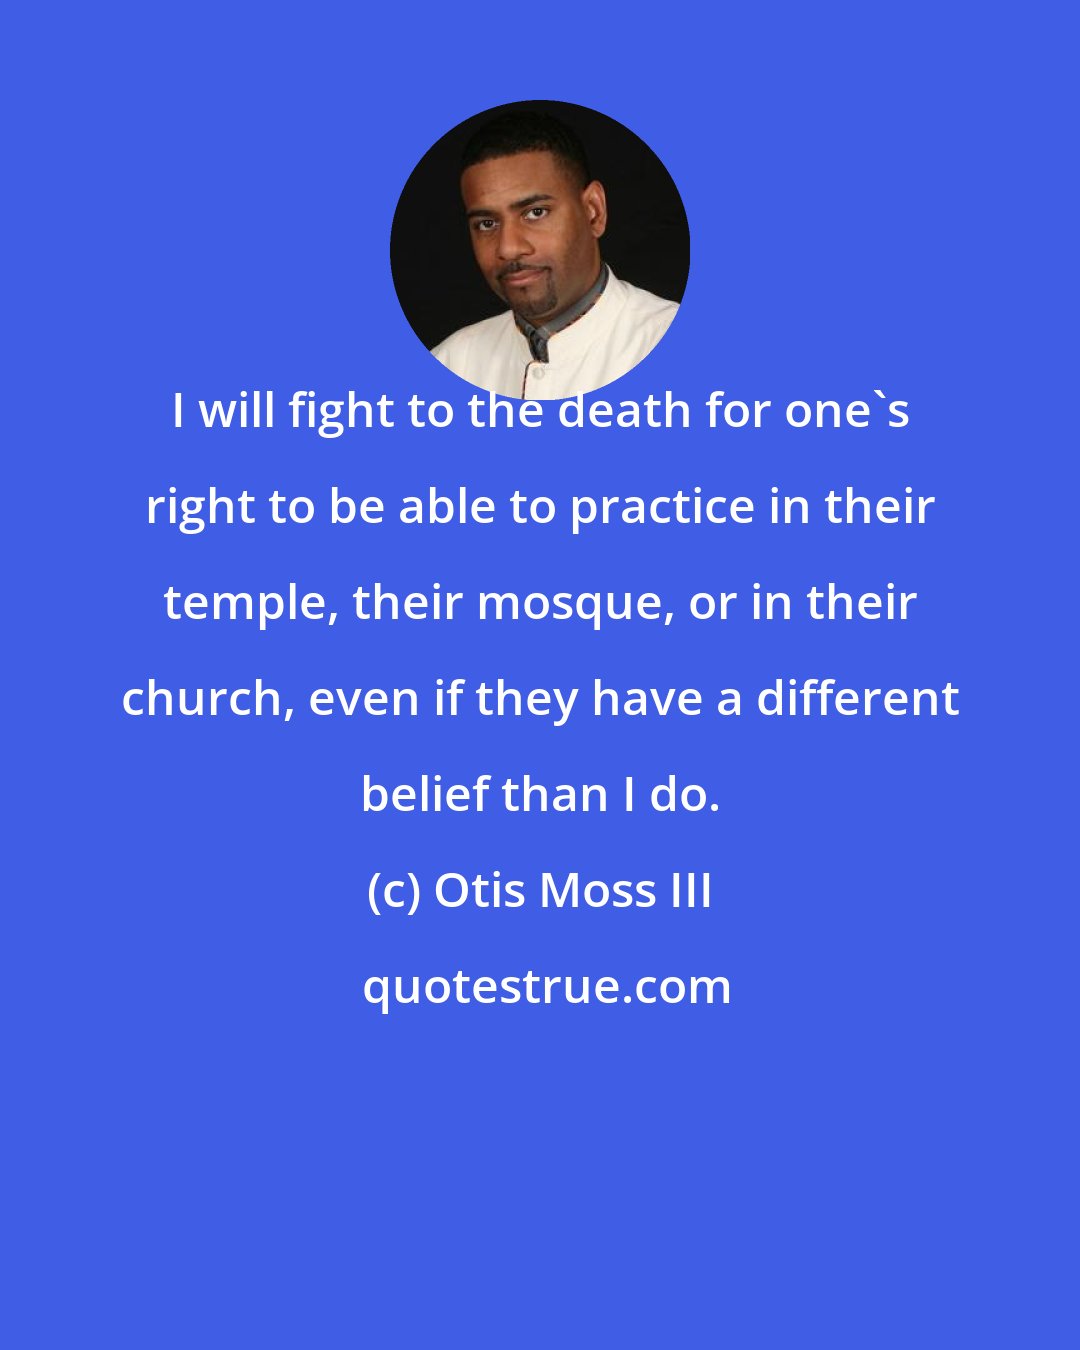 Otis Moss III: I will fight to the death for one's right to be able to practice in their temple, their mosque, or in their church, even if they have a different belief than I do.